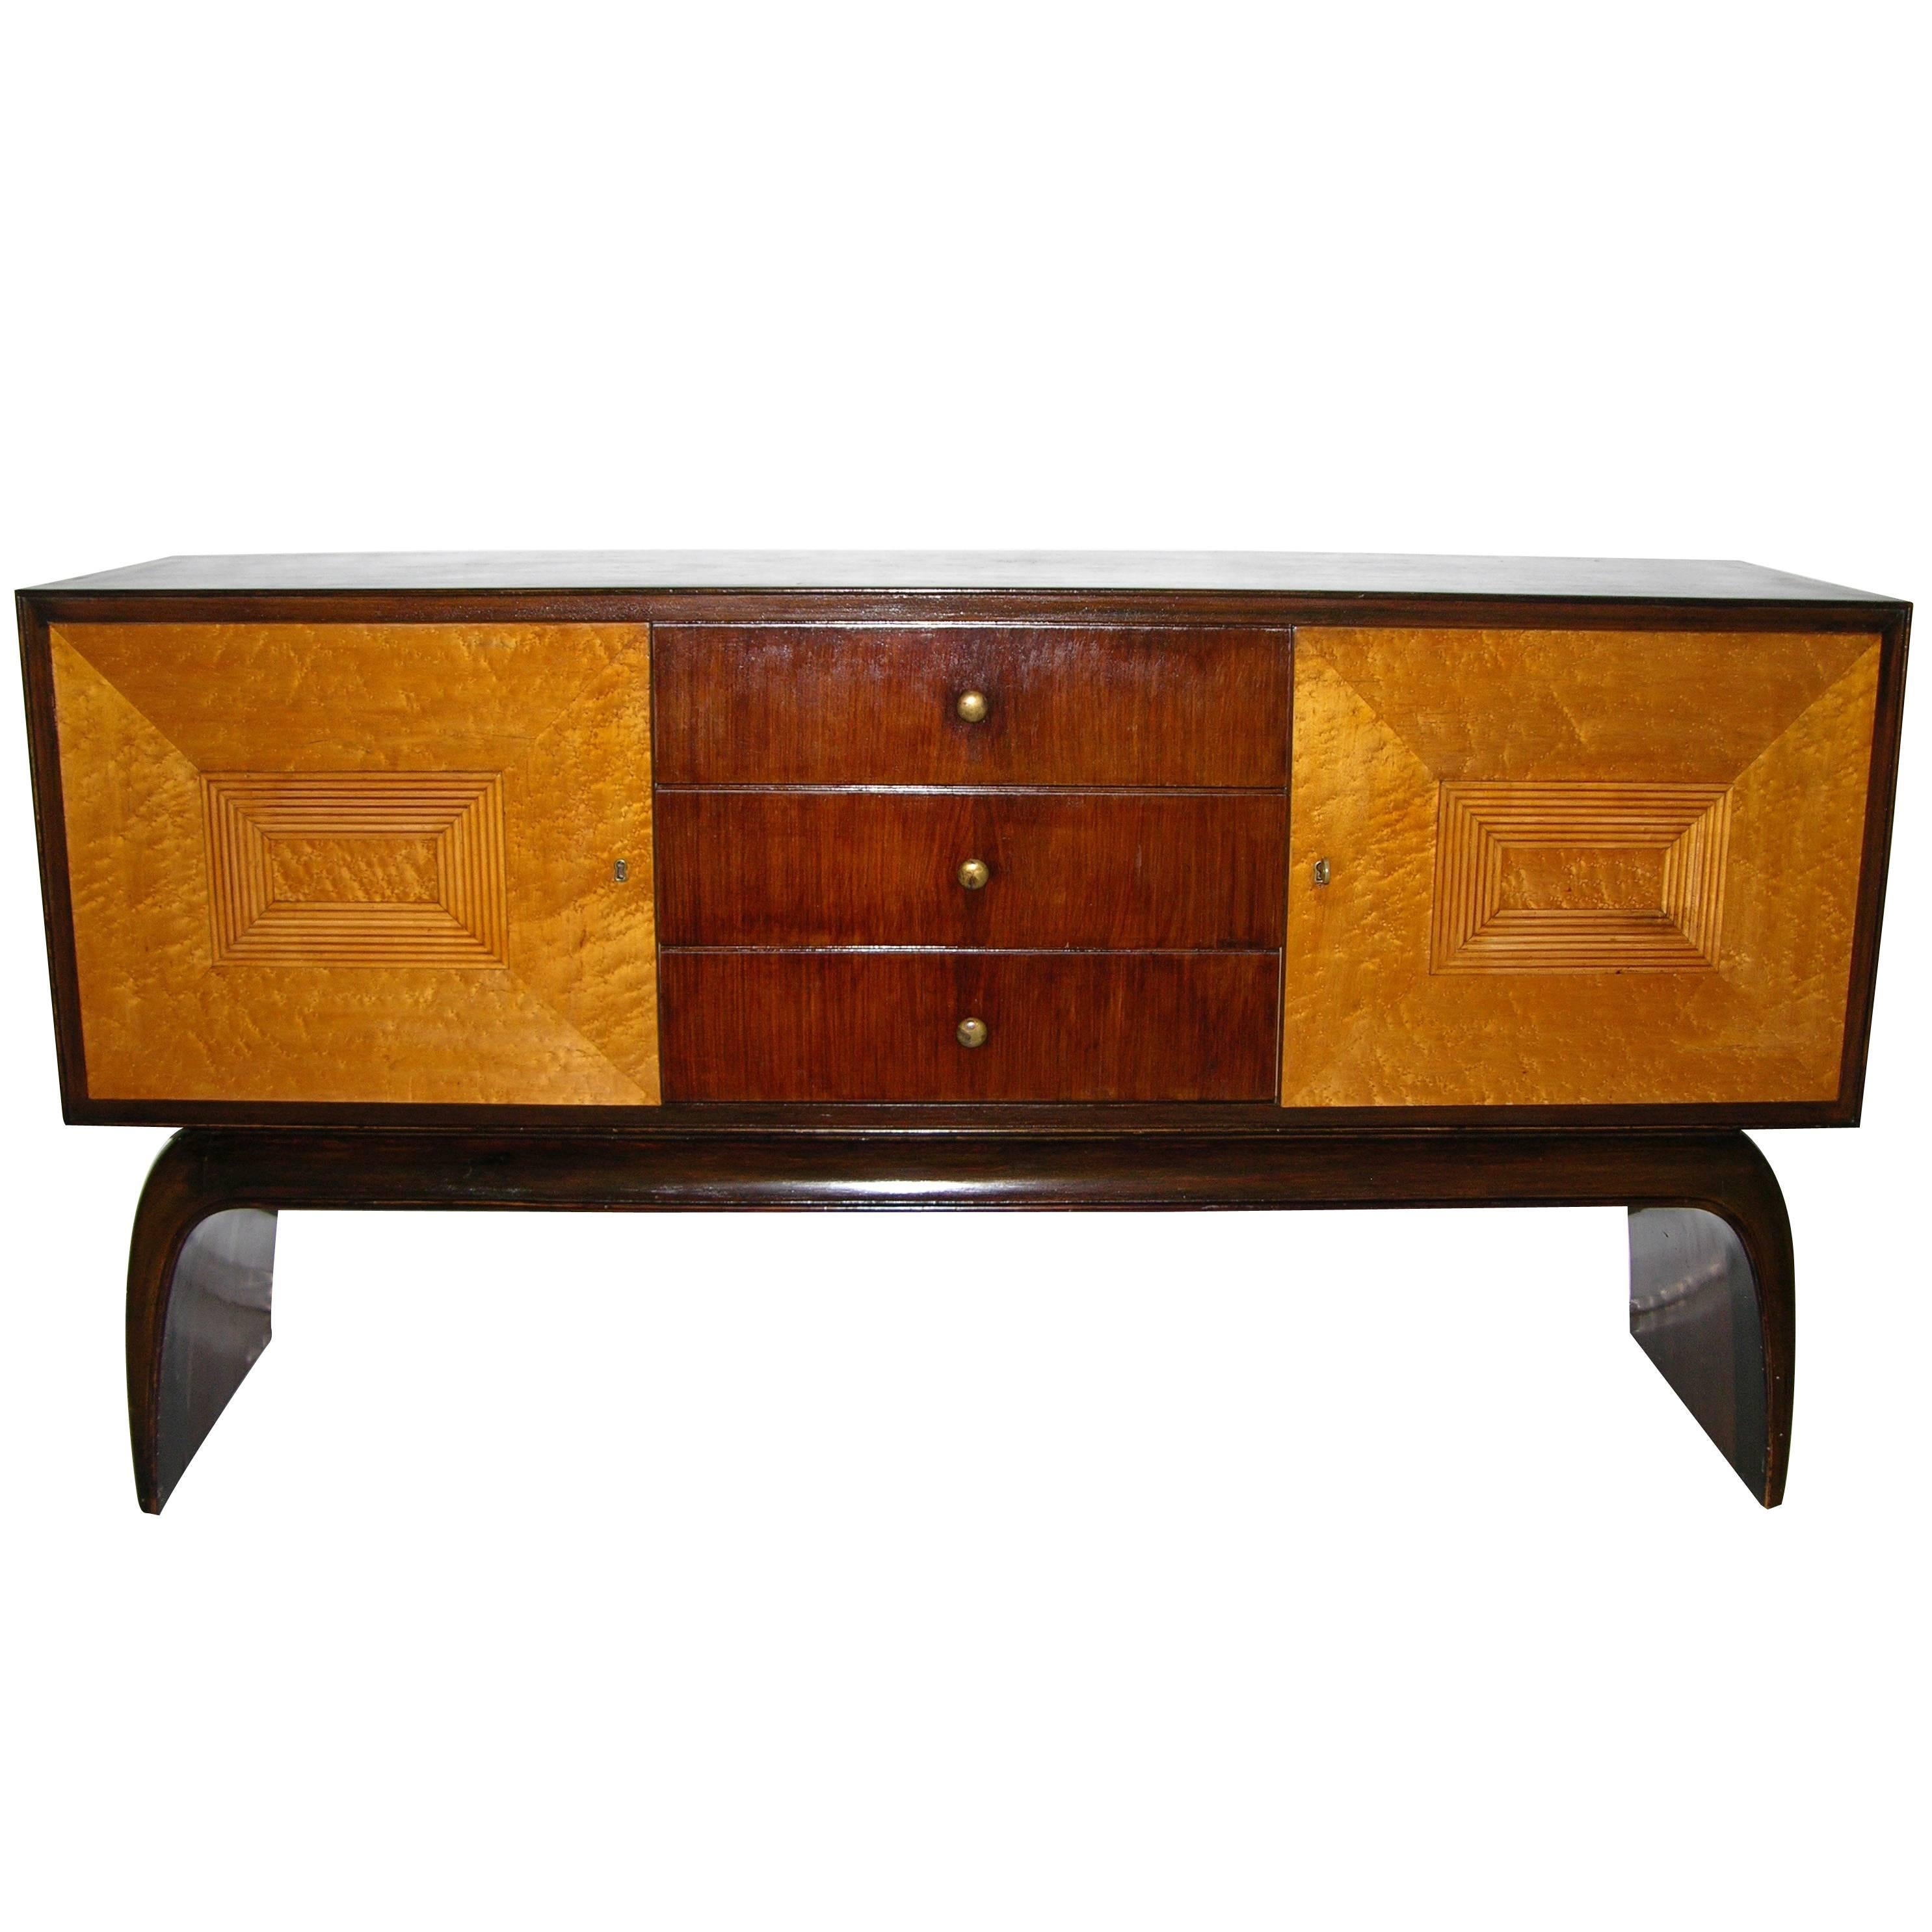 1930 Italian Antique Art Deco Two-Tone Rosewood and Burl Maple Sideboard/Console